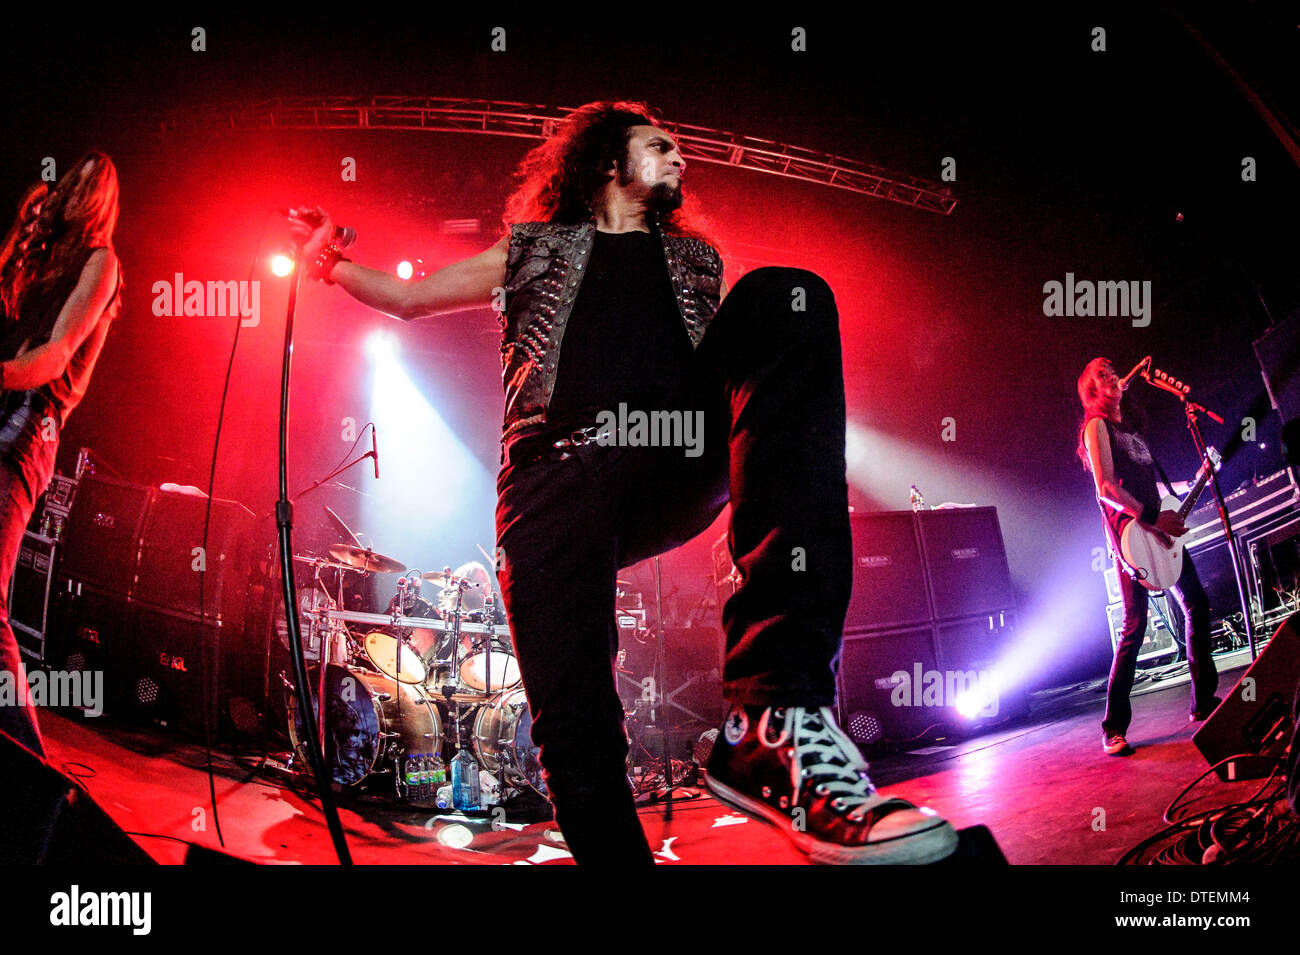 Toronto, Ontario, Canada. 16th Feb, 2014. American thrash metal band Death Angel performed at Sound Academy in Tronto. Band members: ROB CAVESTANY, MARK OSEGUEDA, TED AGUILAR, WILL CARROLL, DAMIEN SISSON Credit:  Igor Vidyashev/ZUMAPRESS.com/Alamy Live News Stock Photo